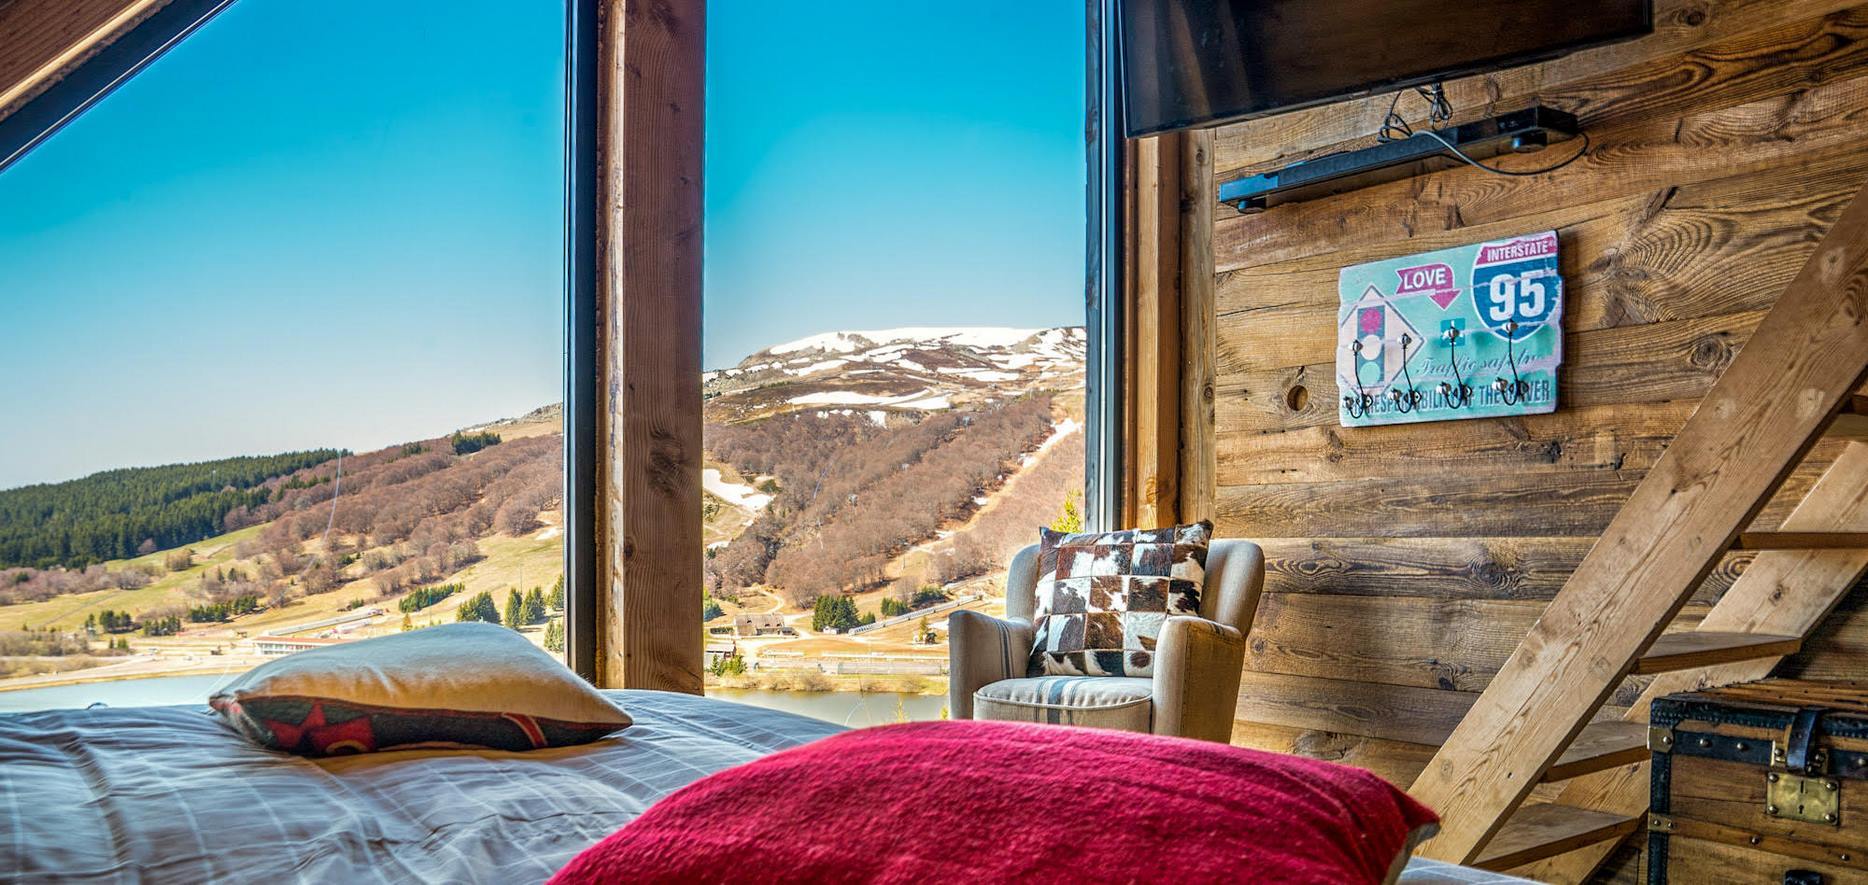 Chalet in Super Besse l'Anorak, discover the Bois Joli Room and its magnificent view